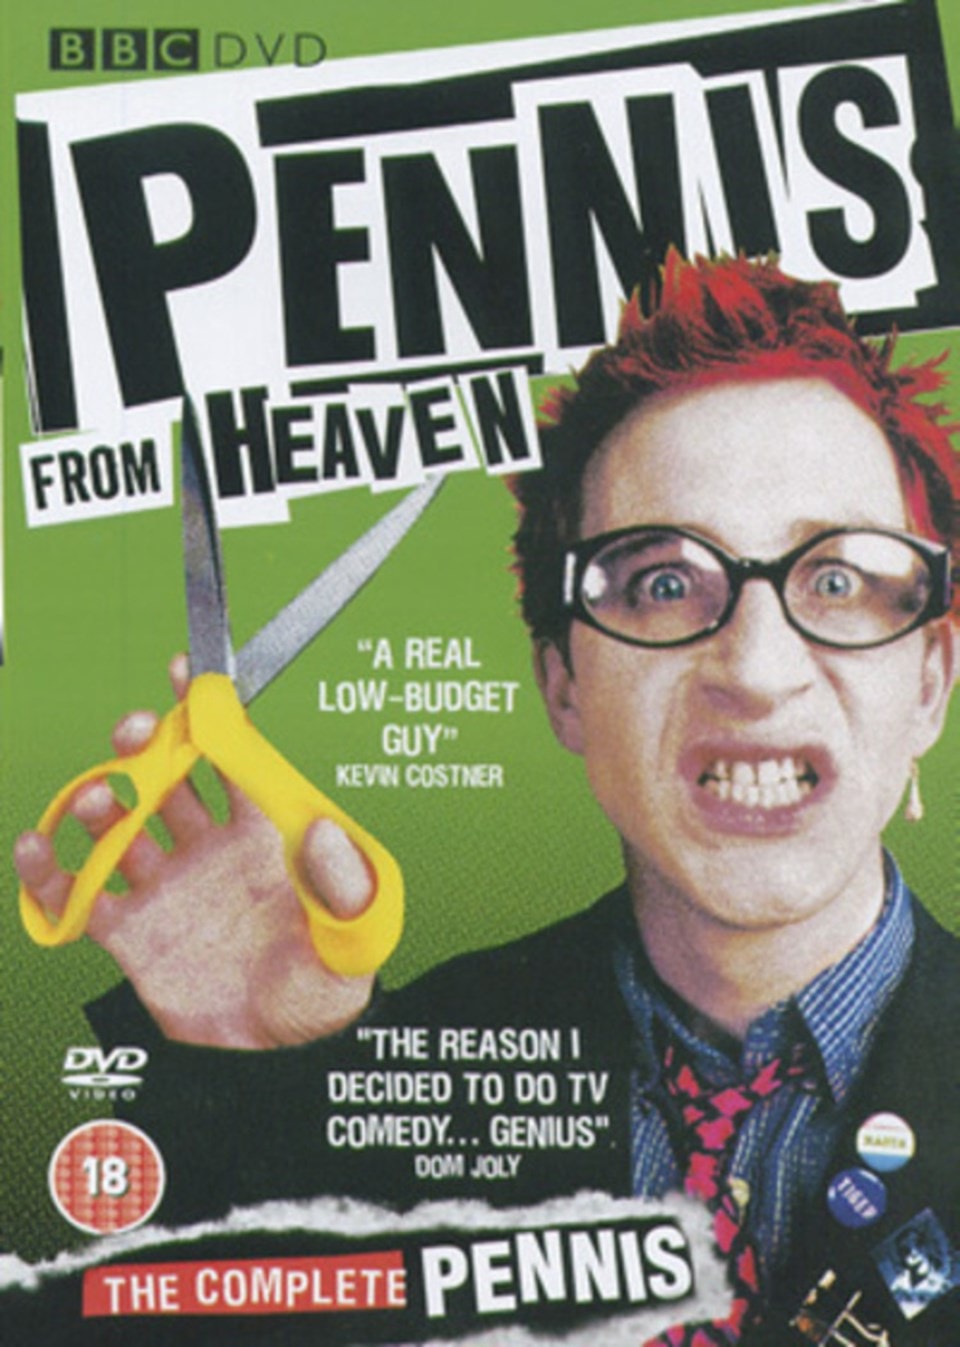 Dennis Pennis Pennis From Heaven The Complete Pennis Dvd Free Shipping Over £20 Hmv Store